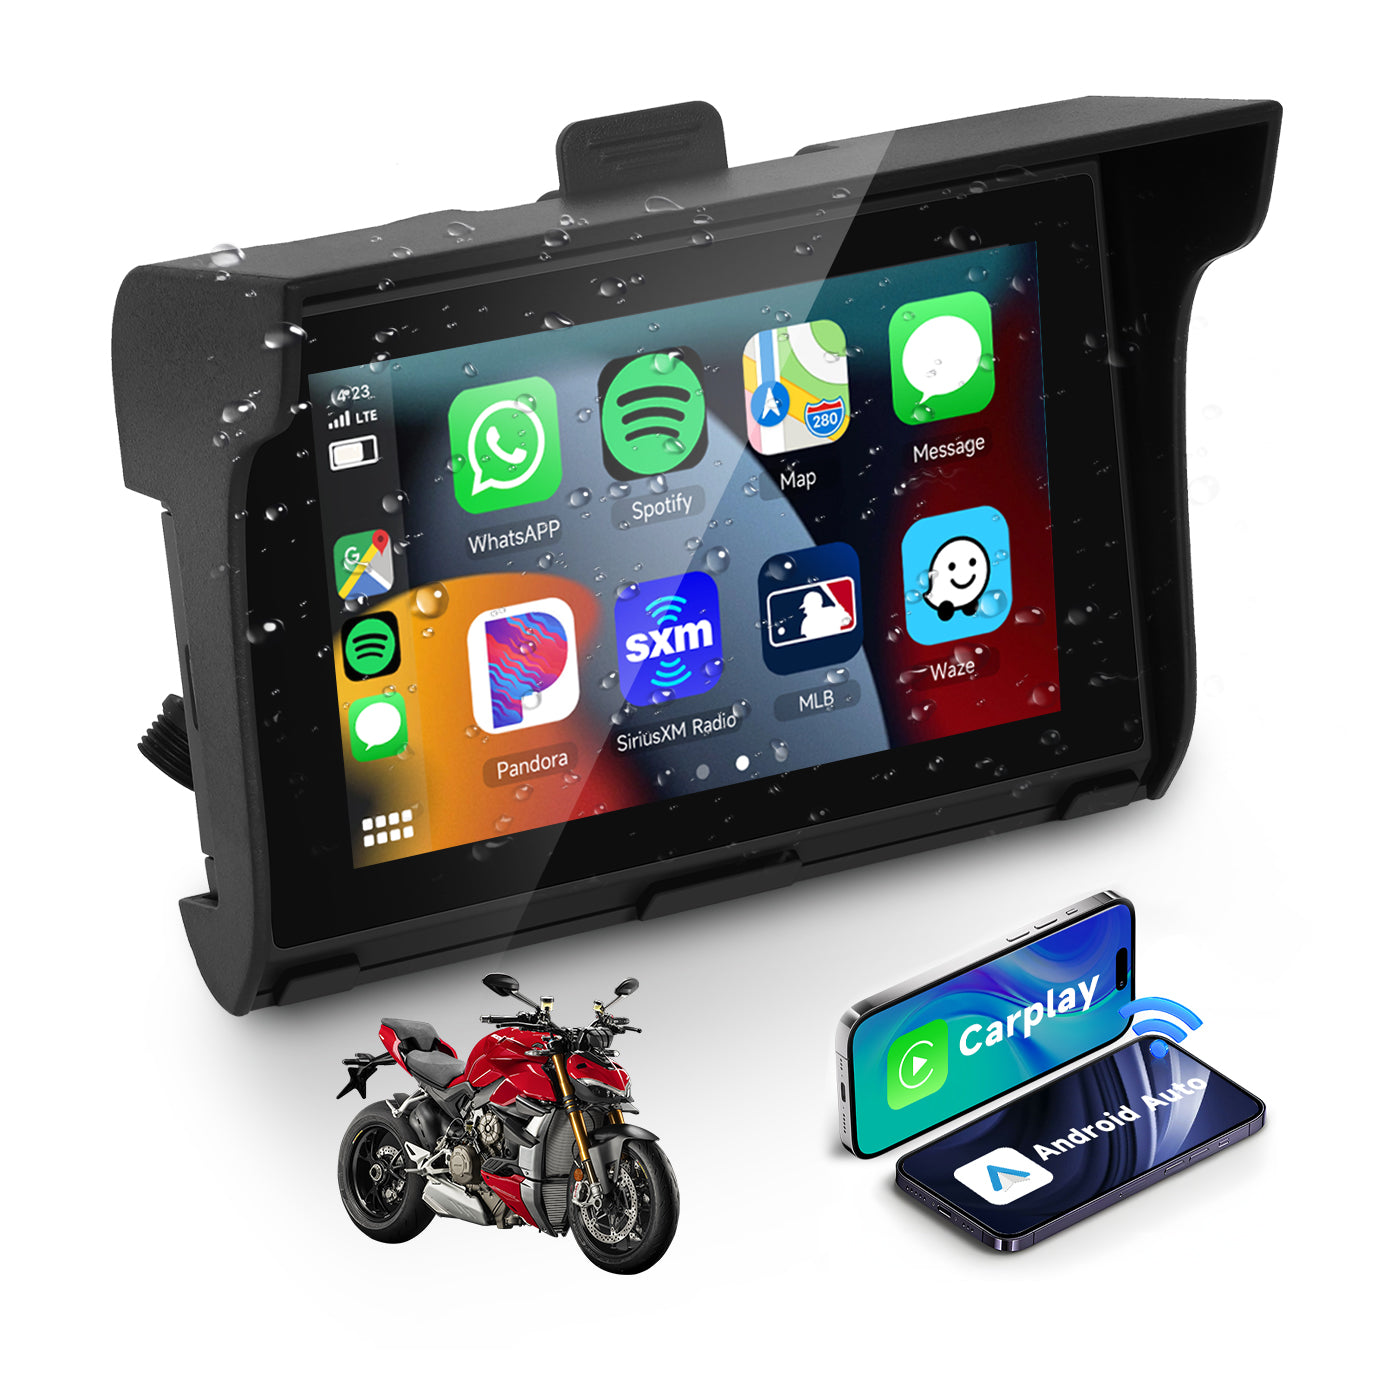 Zmecar 5" Motorcycle Carplay Portable Android Auto Screen Supports Android AirPlay Android Cast, Bluetooth transmitter TF/USB